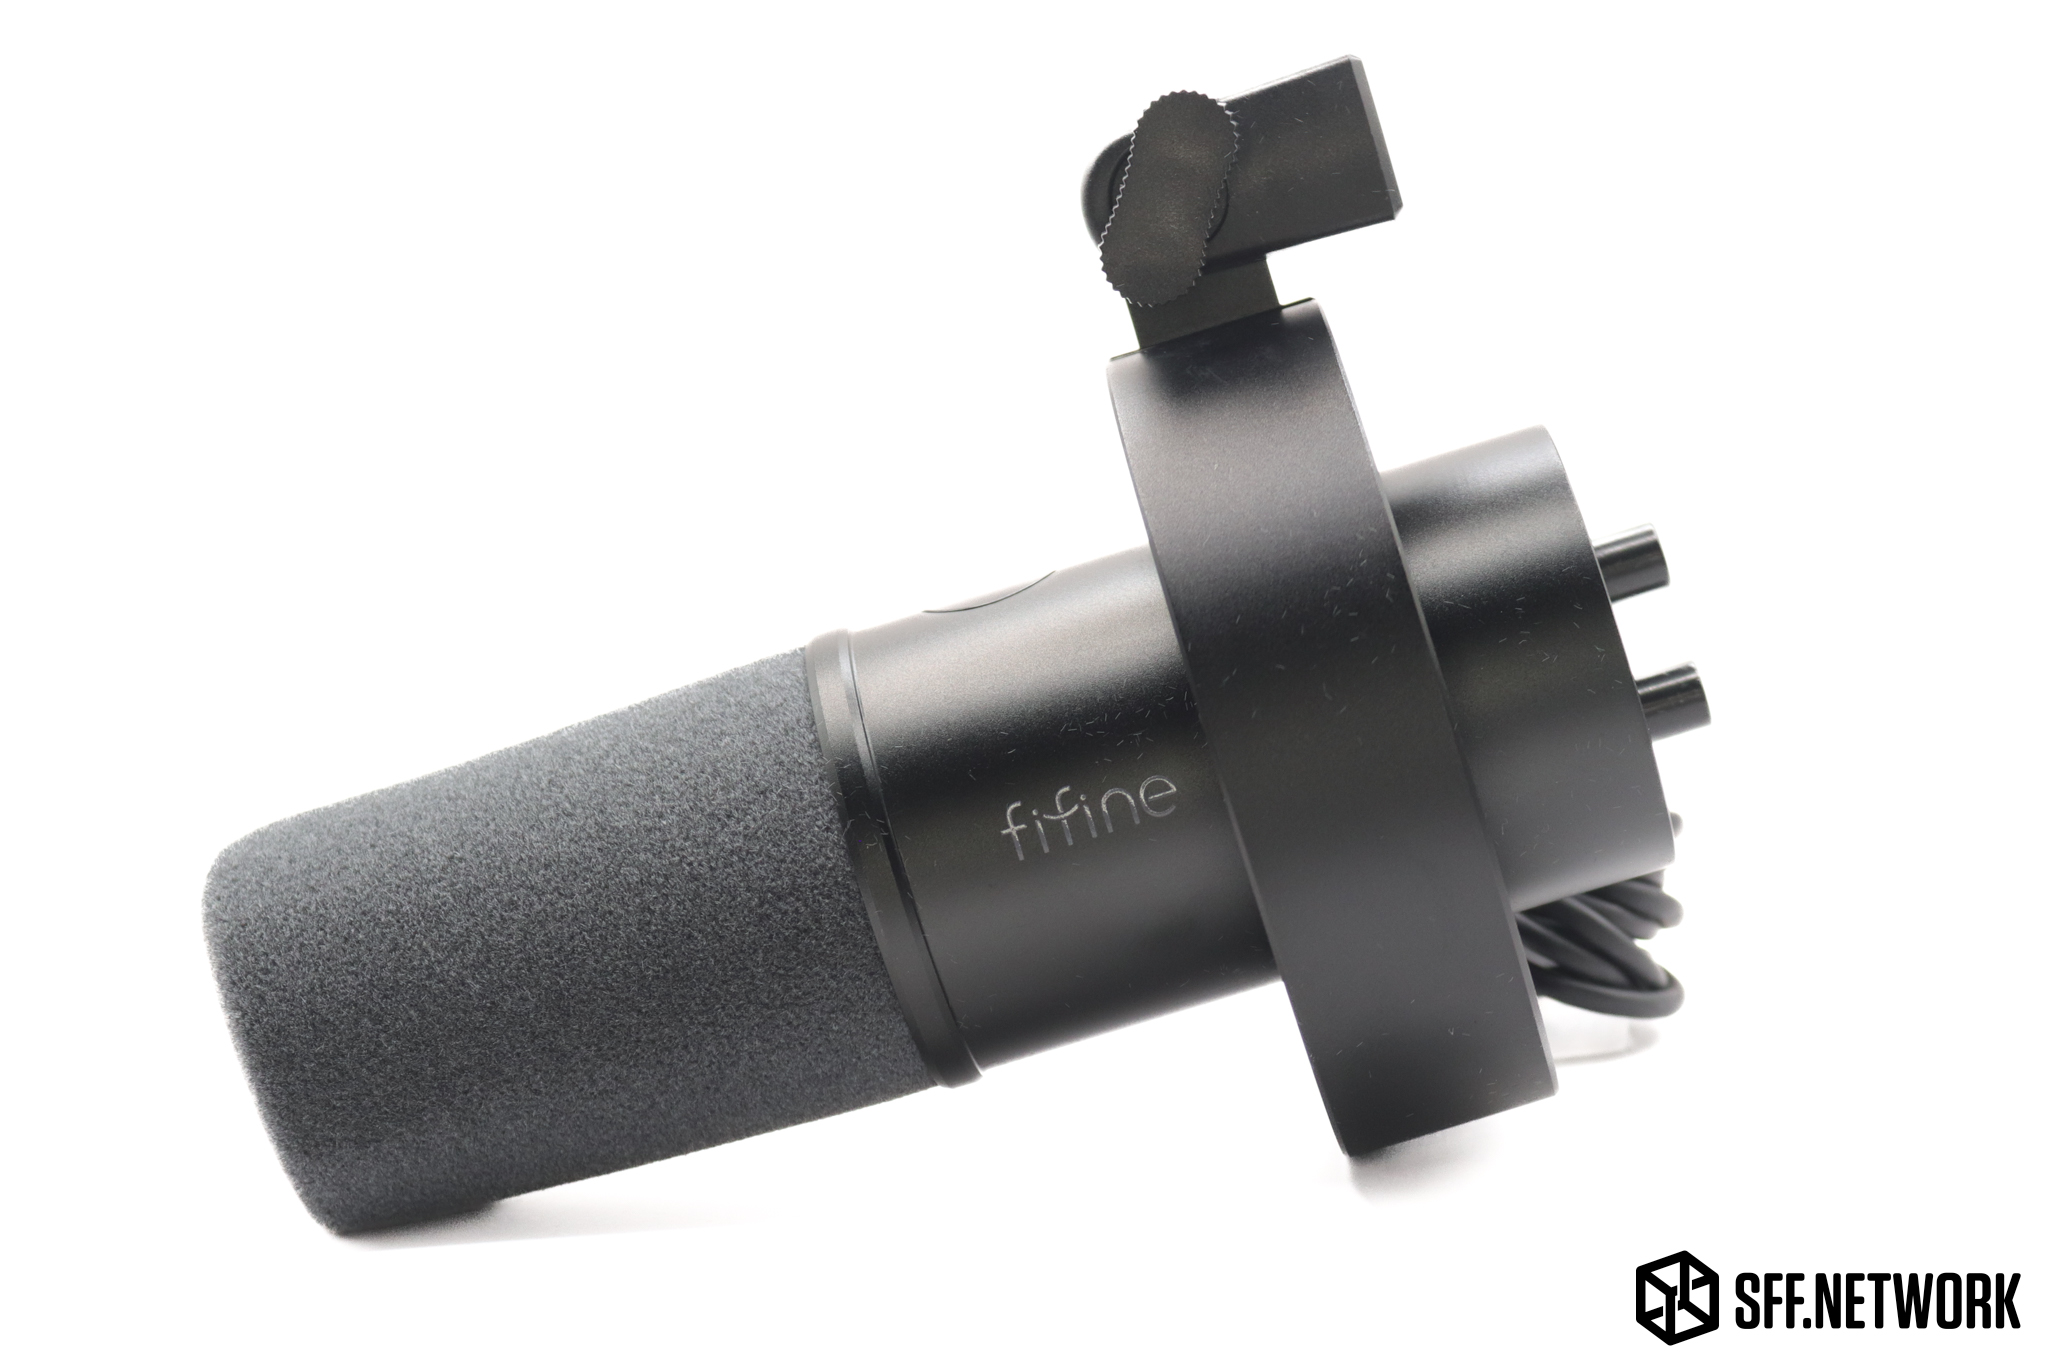 Fifine K688 review: a fine microphone - Soundphile Review